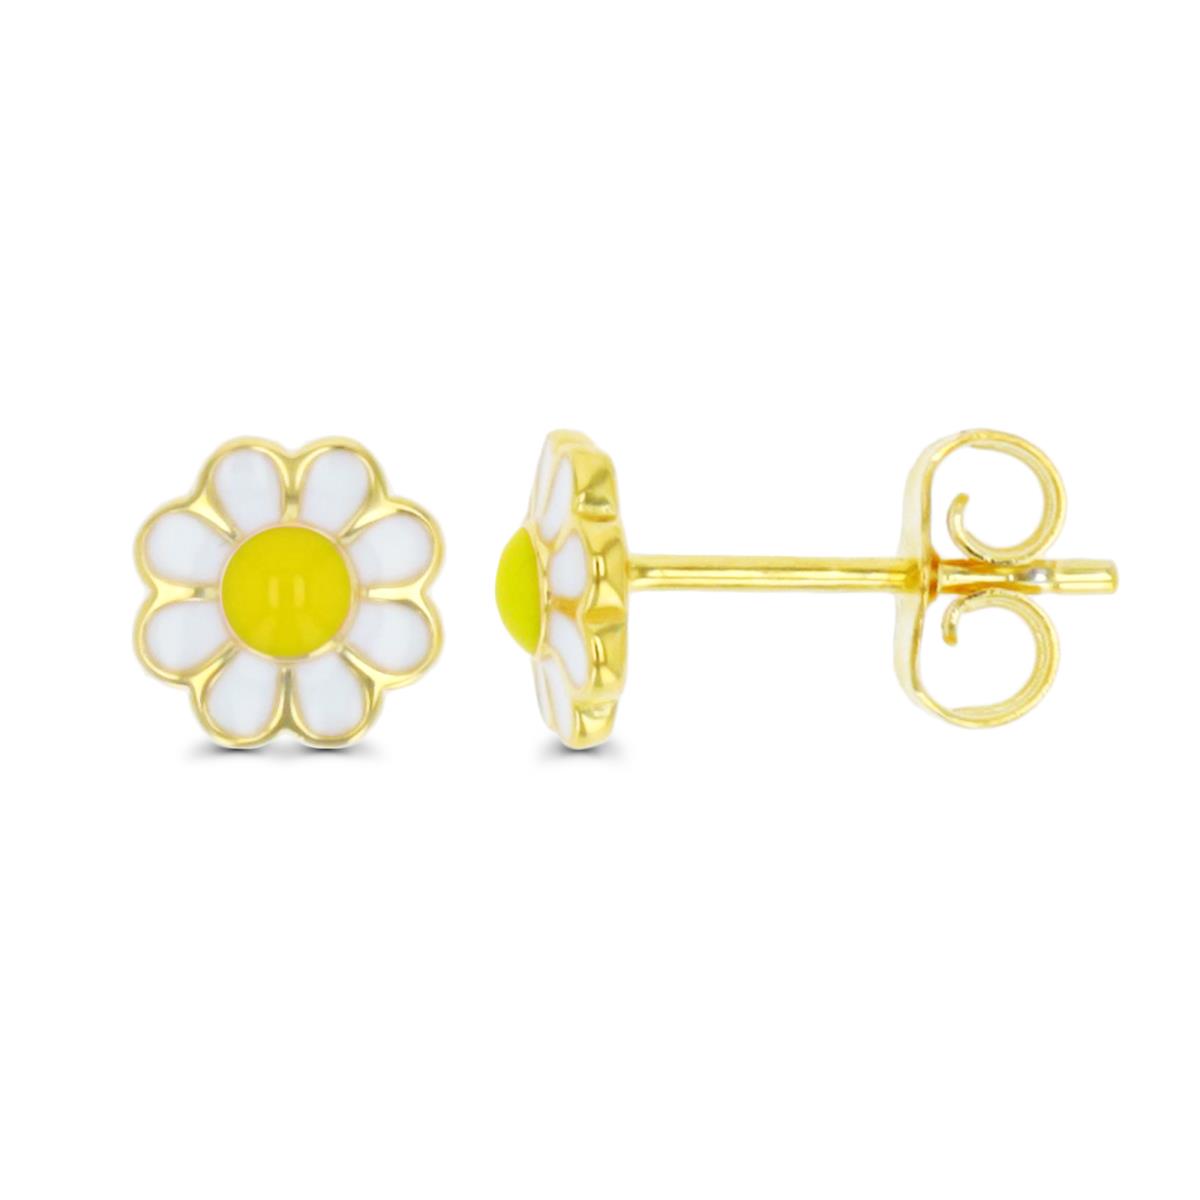 Sterling Silver Yellow 1 Micron 7MM Round Flower Enamel White & Yellow Stud Earring